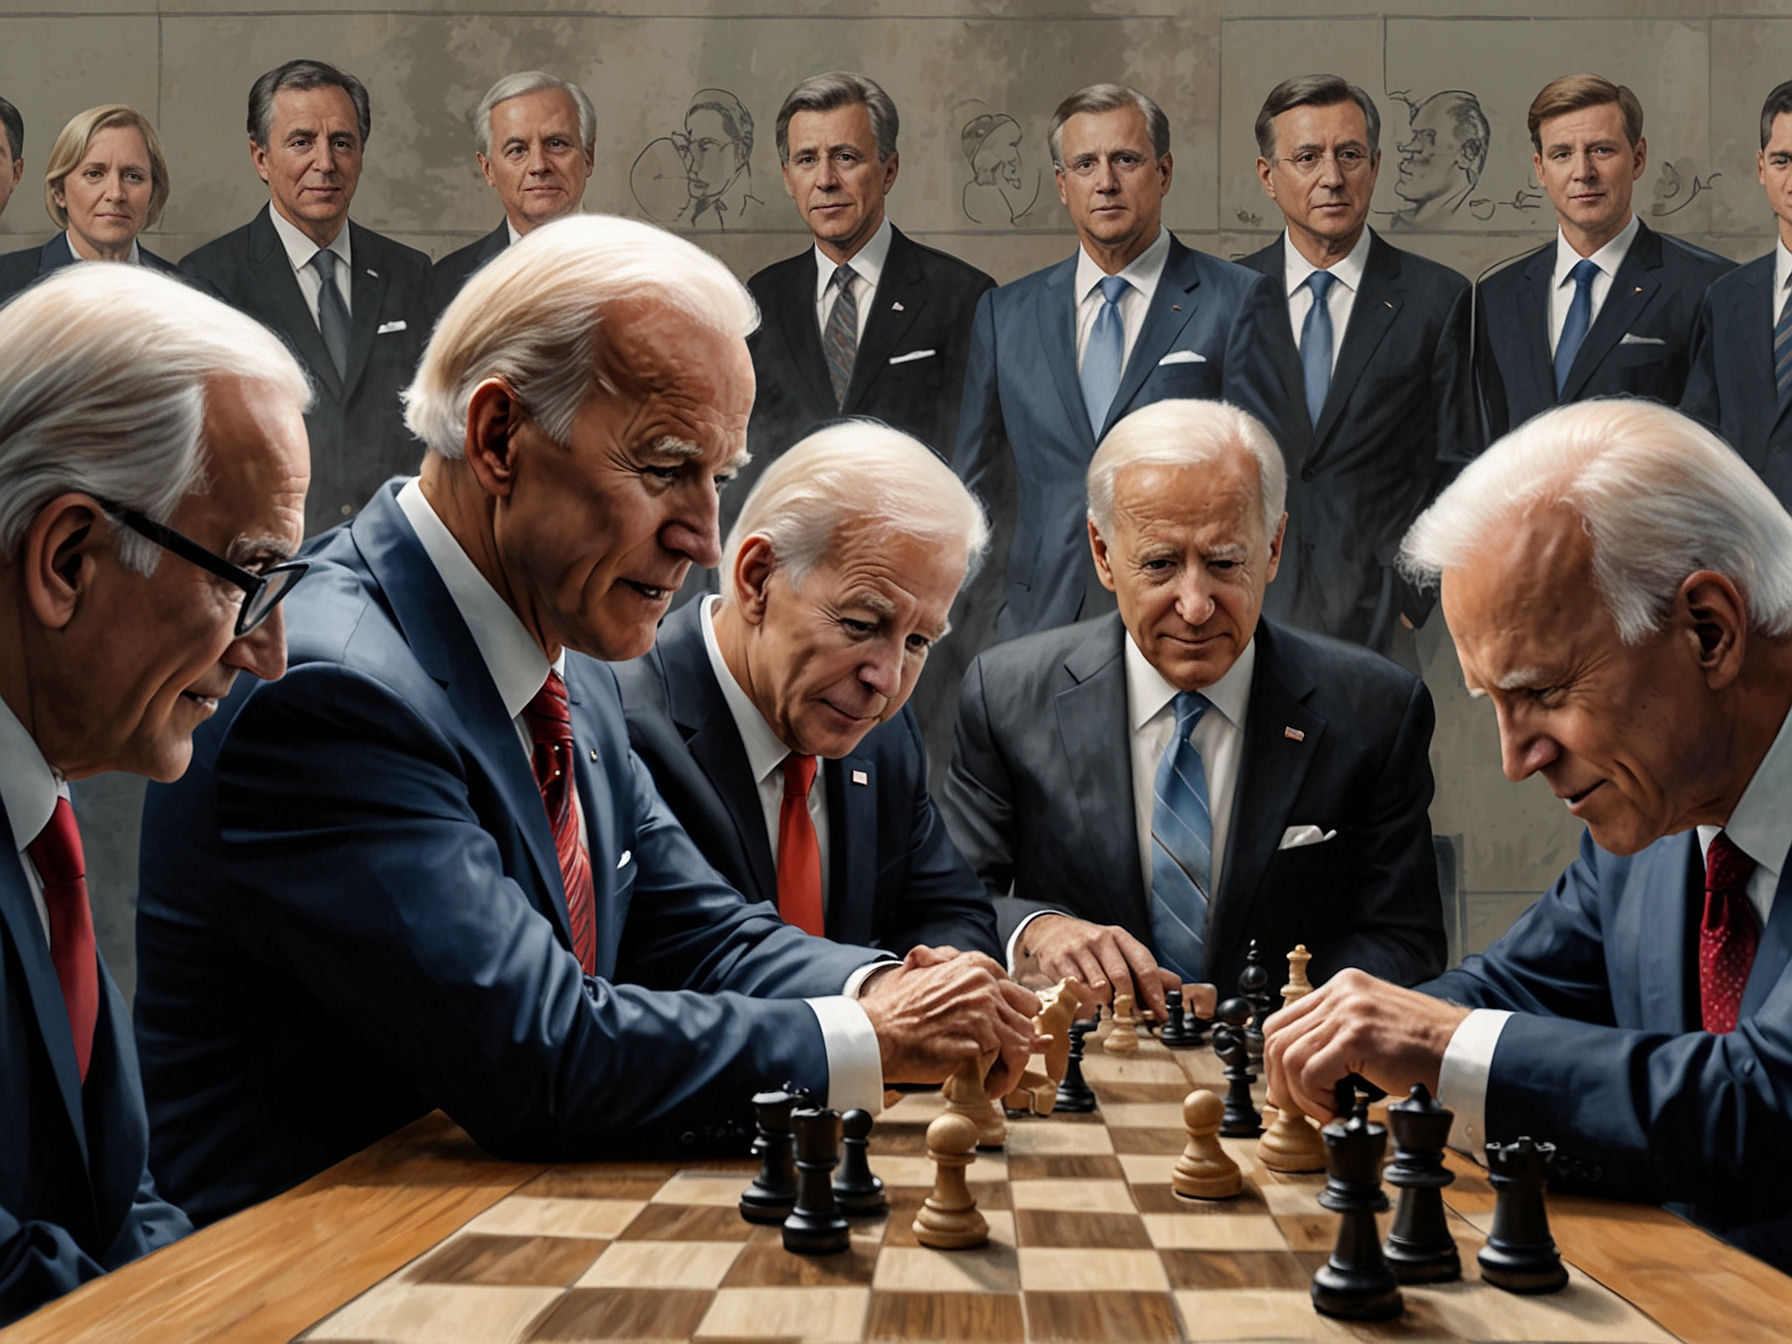 An illustration of President Biden playing chess, surrounded by other world leaders, highlighting his strategic and collaborative approach on issues like climate change and global health at the G7 summit.